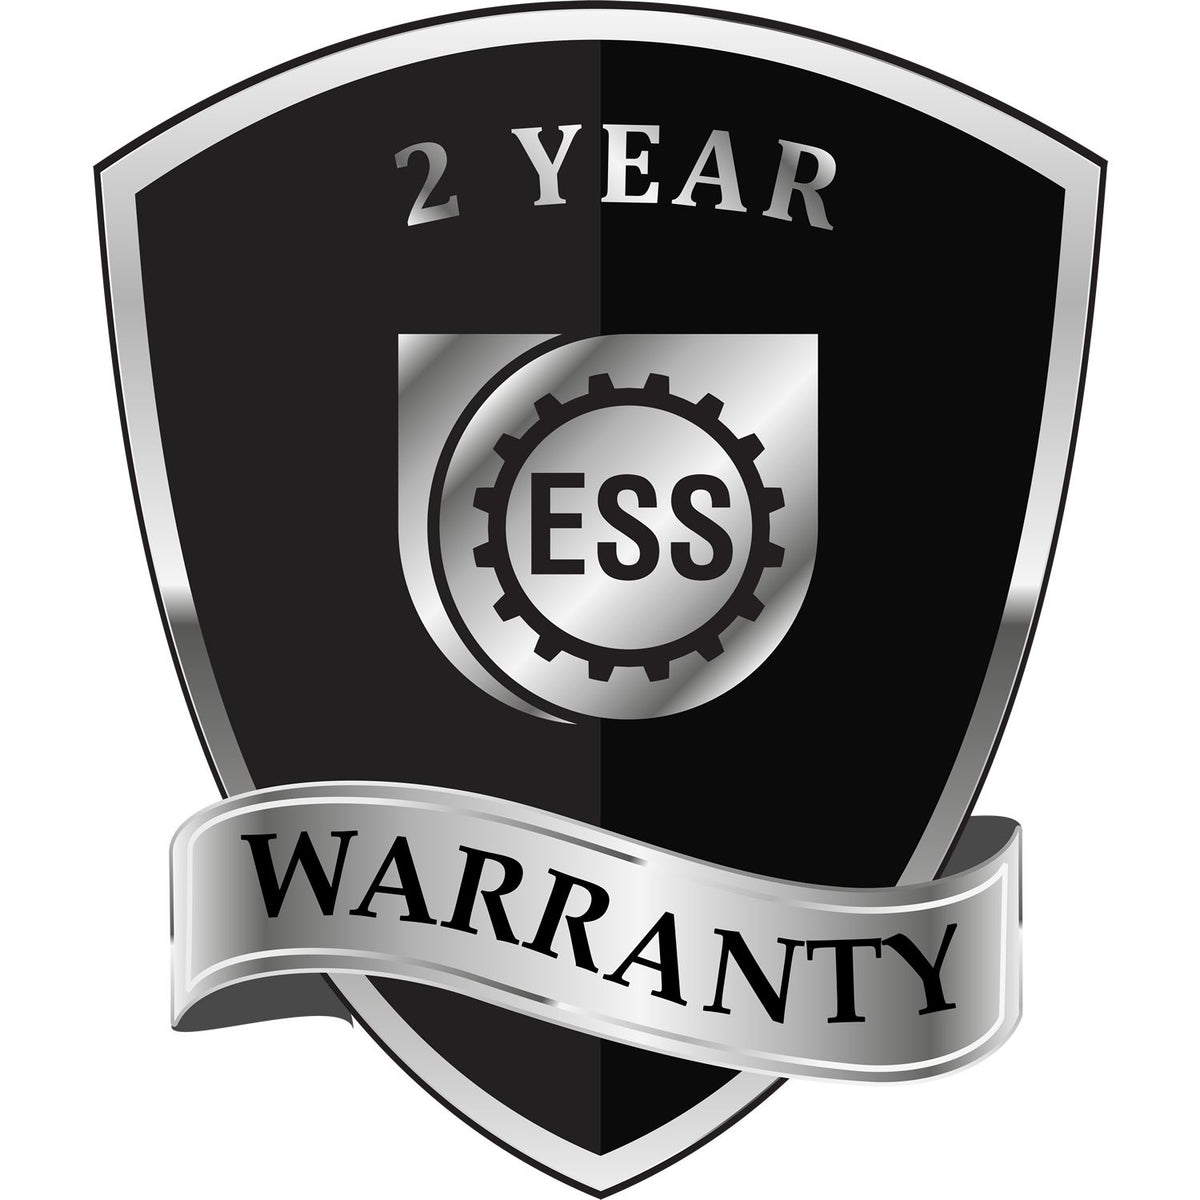 A badge or emblem showing a warranty icon for the Utah Engineer Desk Seal